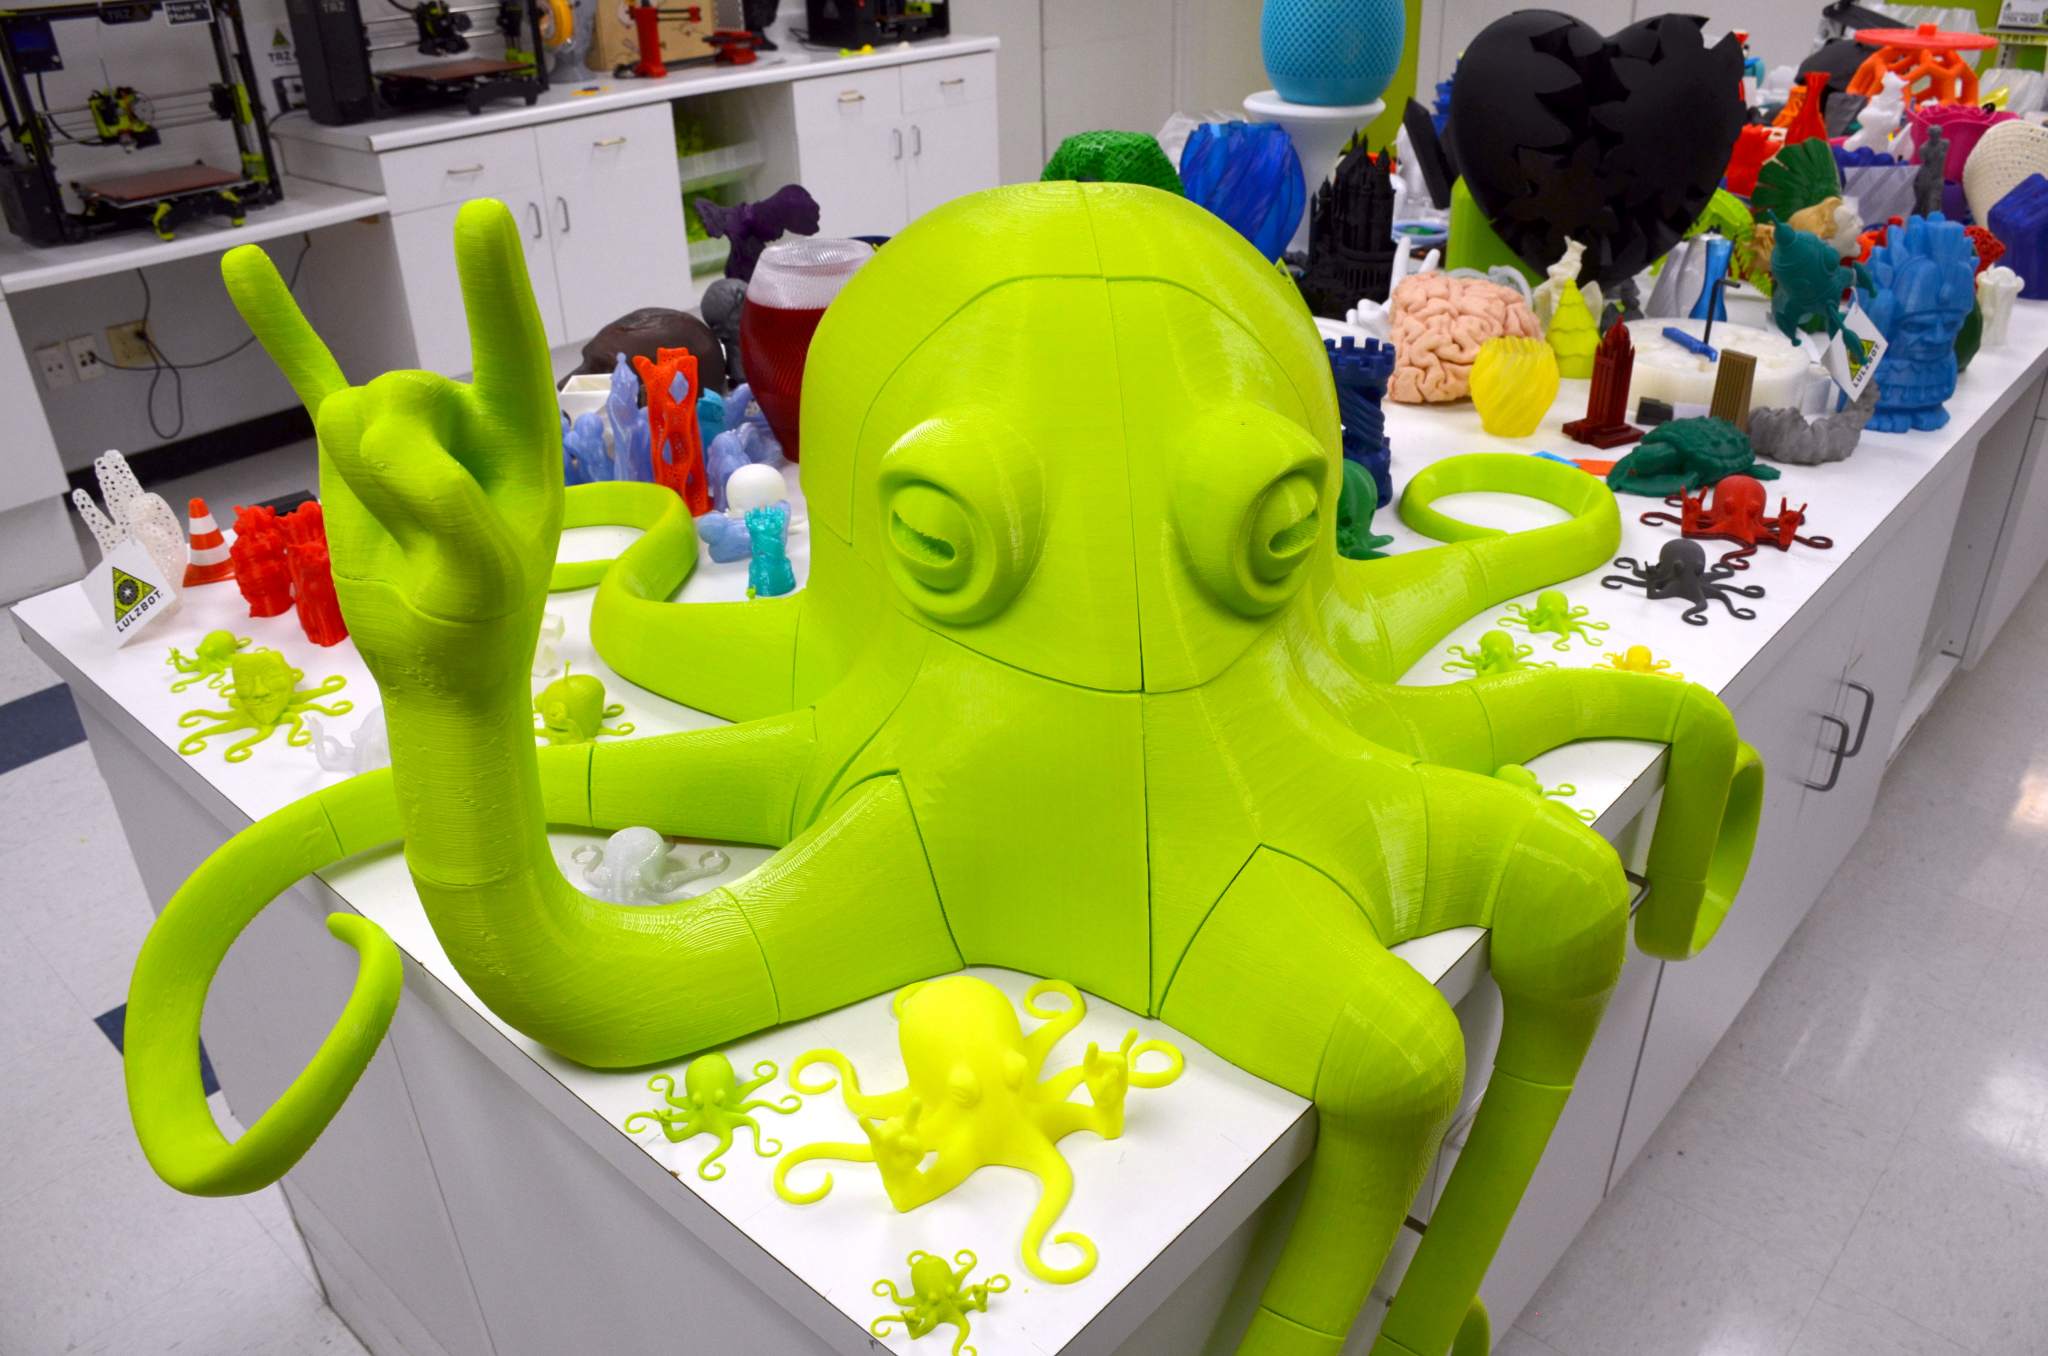 300 hour Rocktopus print made with Lulzbot MOARstruder tool on display at CES 2017.